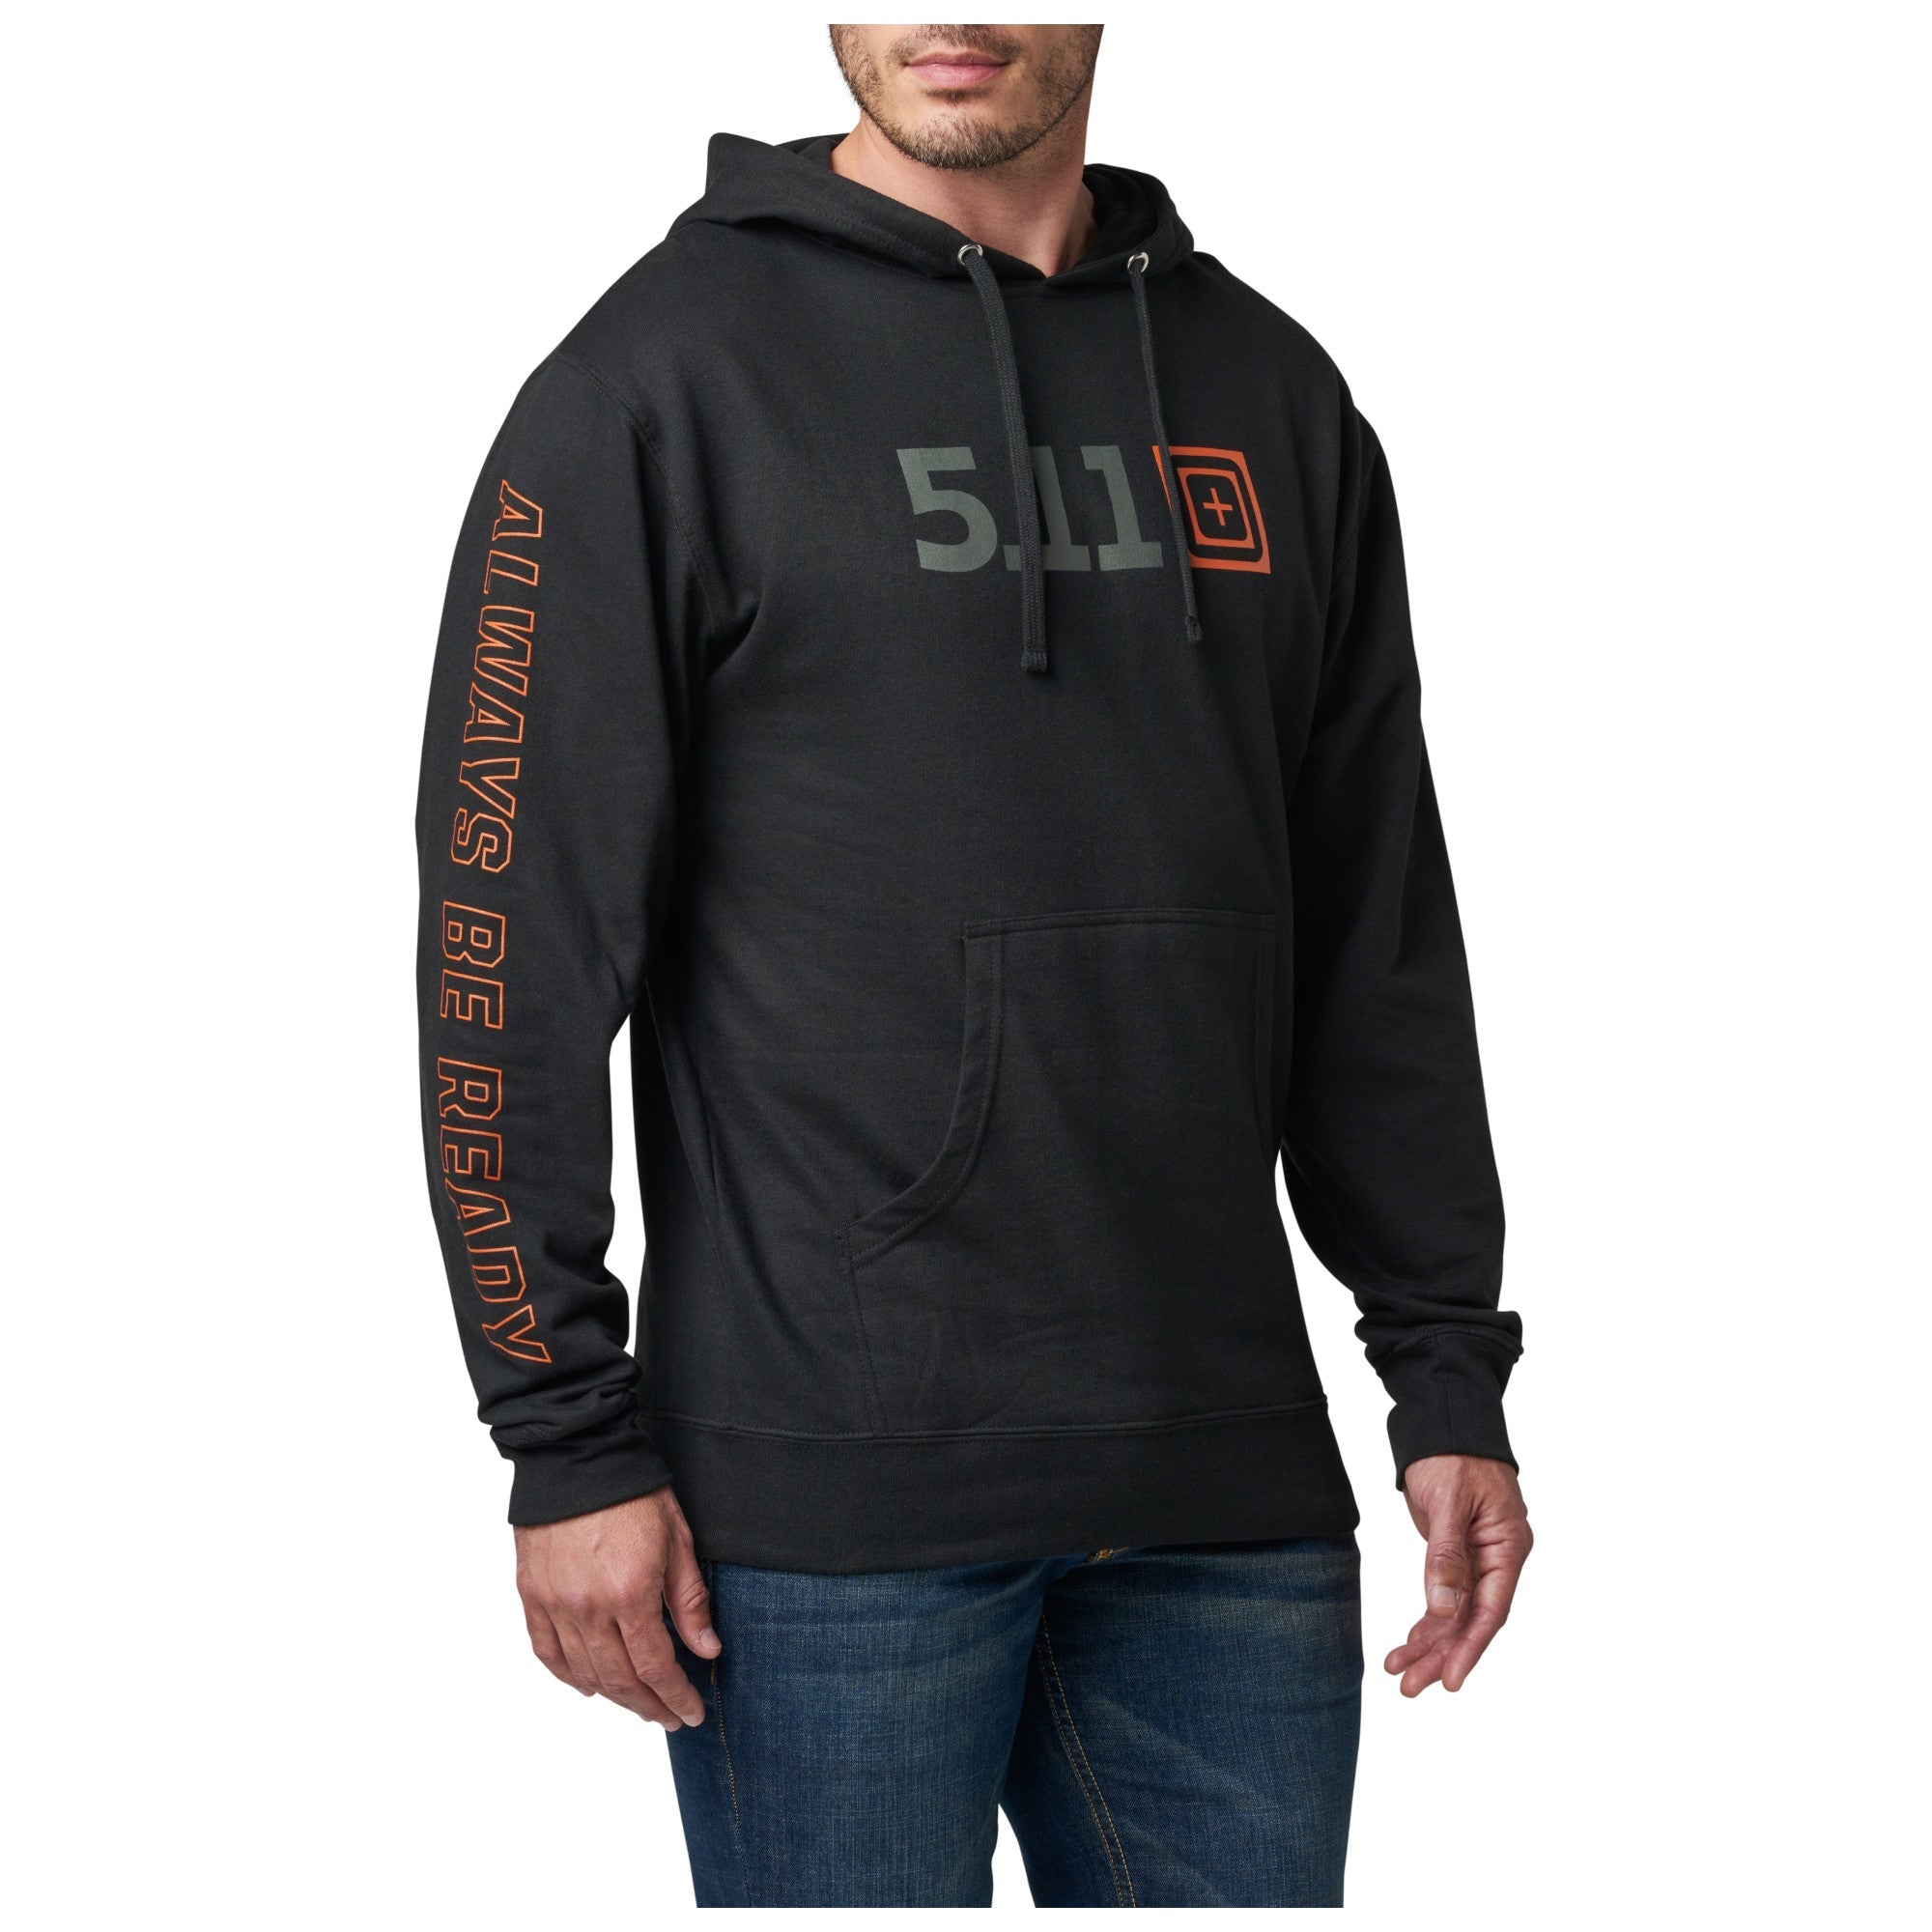 5.11 Tactical Scope Hoodie Outerwear 5.11 Tactical Black Small Tactical Gear Supplier Tactical Distributors Australia